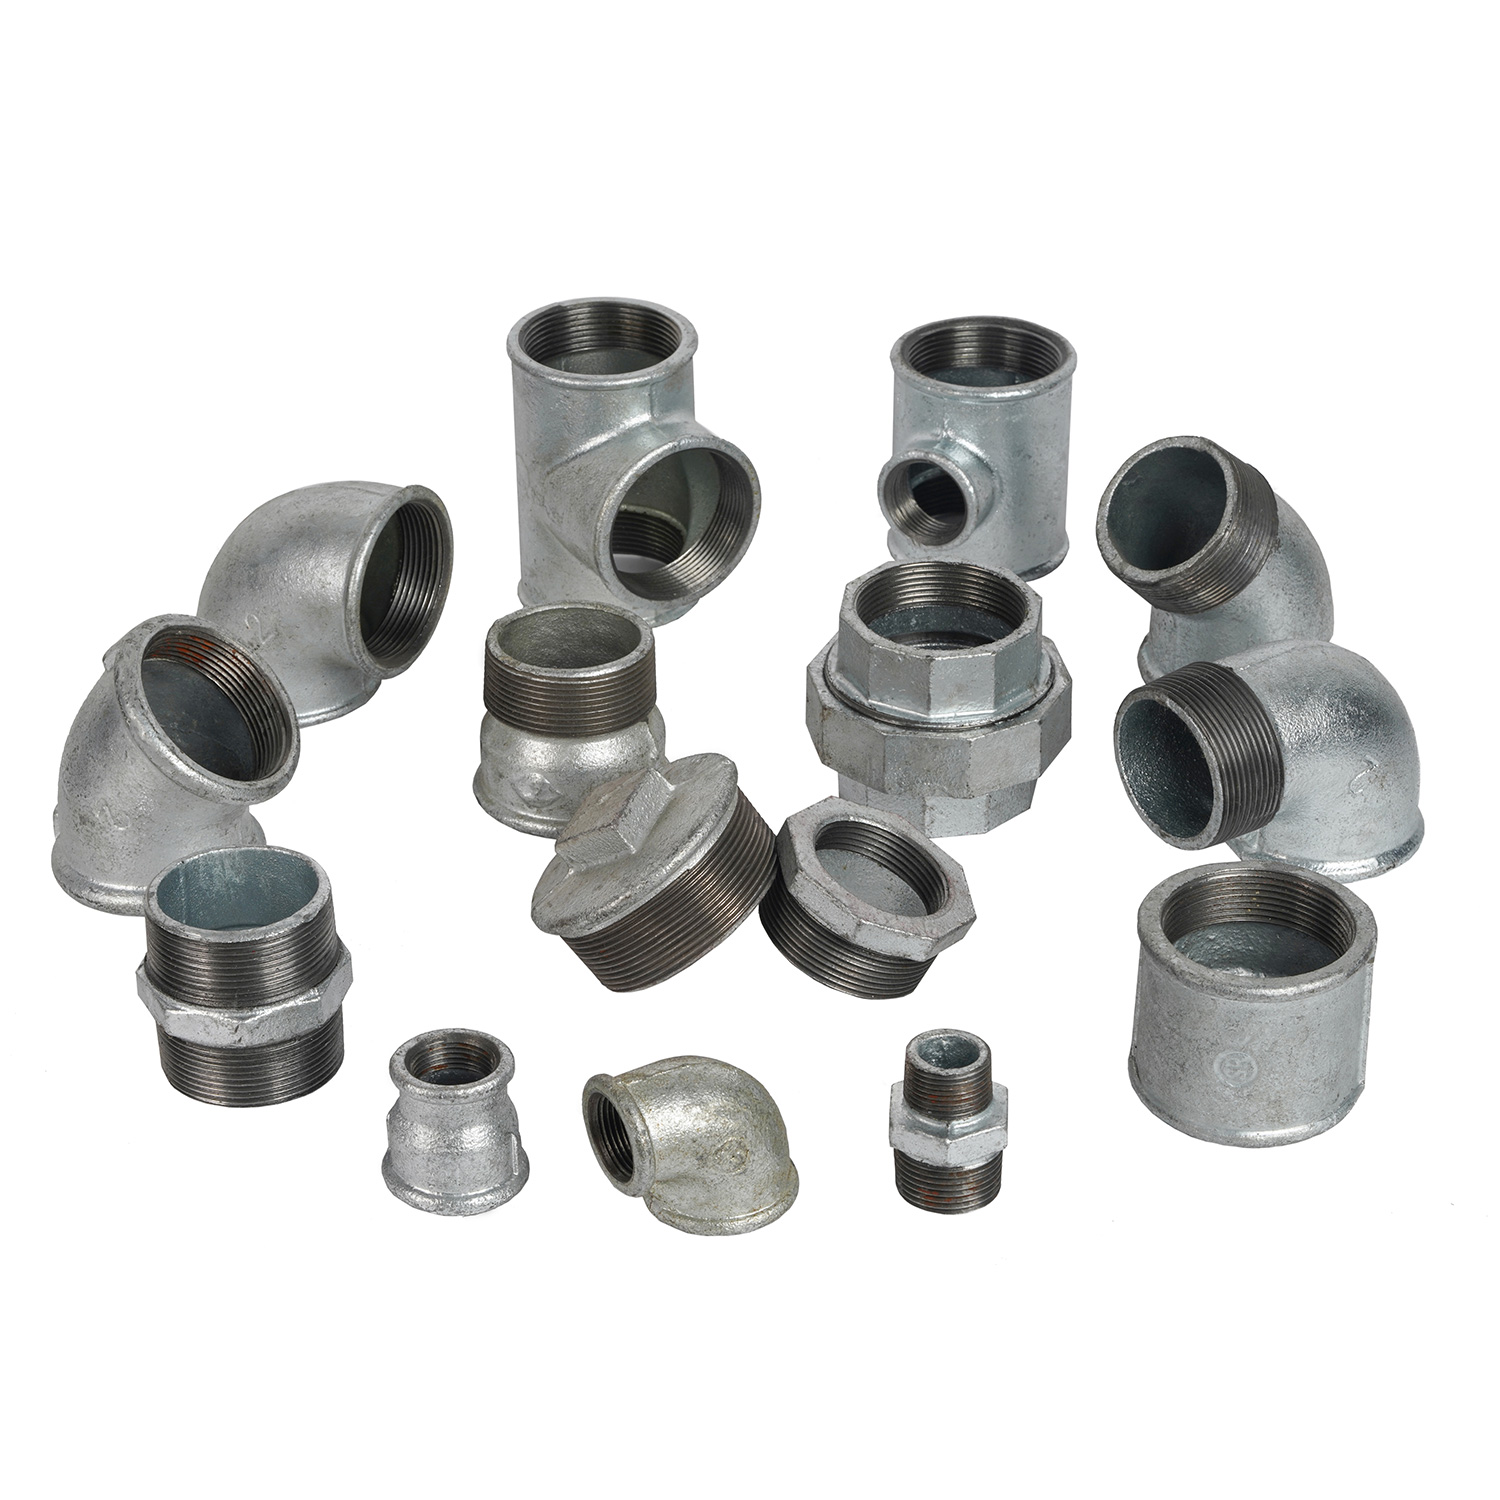 Hot Deep Galvanized Fittings with T Brand